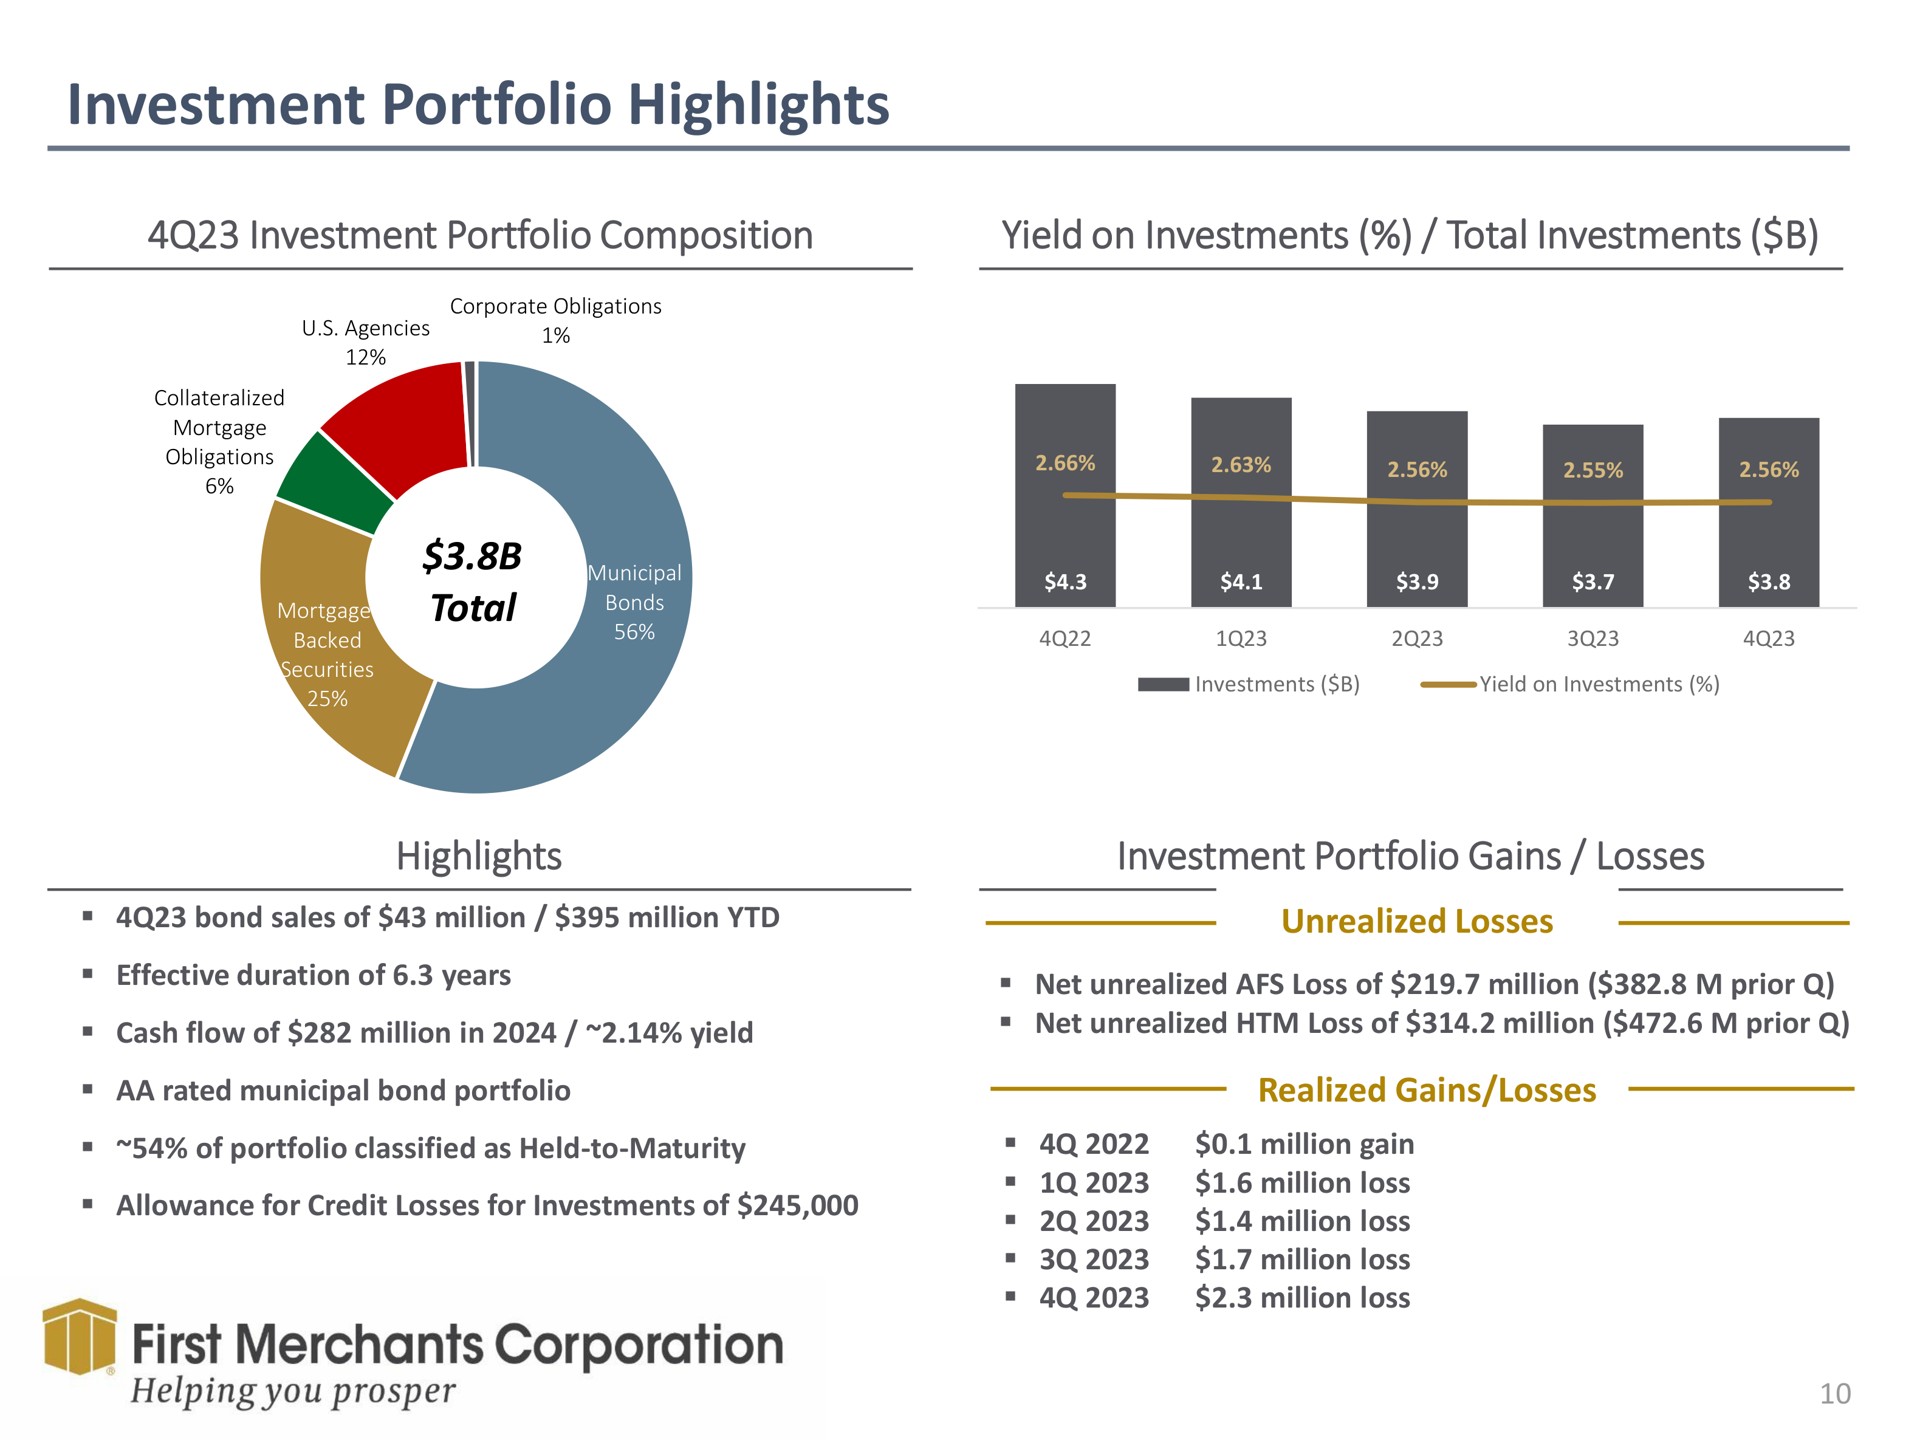 investment portfolio highlights investment portfolio composition yield on investments total investments total highlights investment portfolio gains losses first merchants corporation | First Merchants